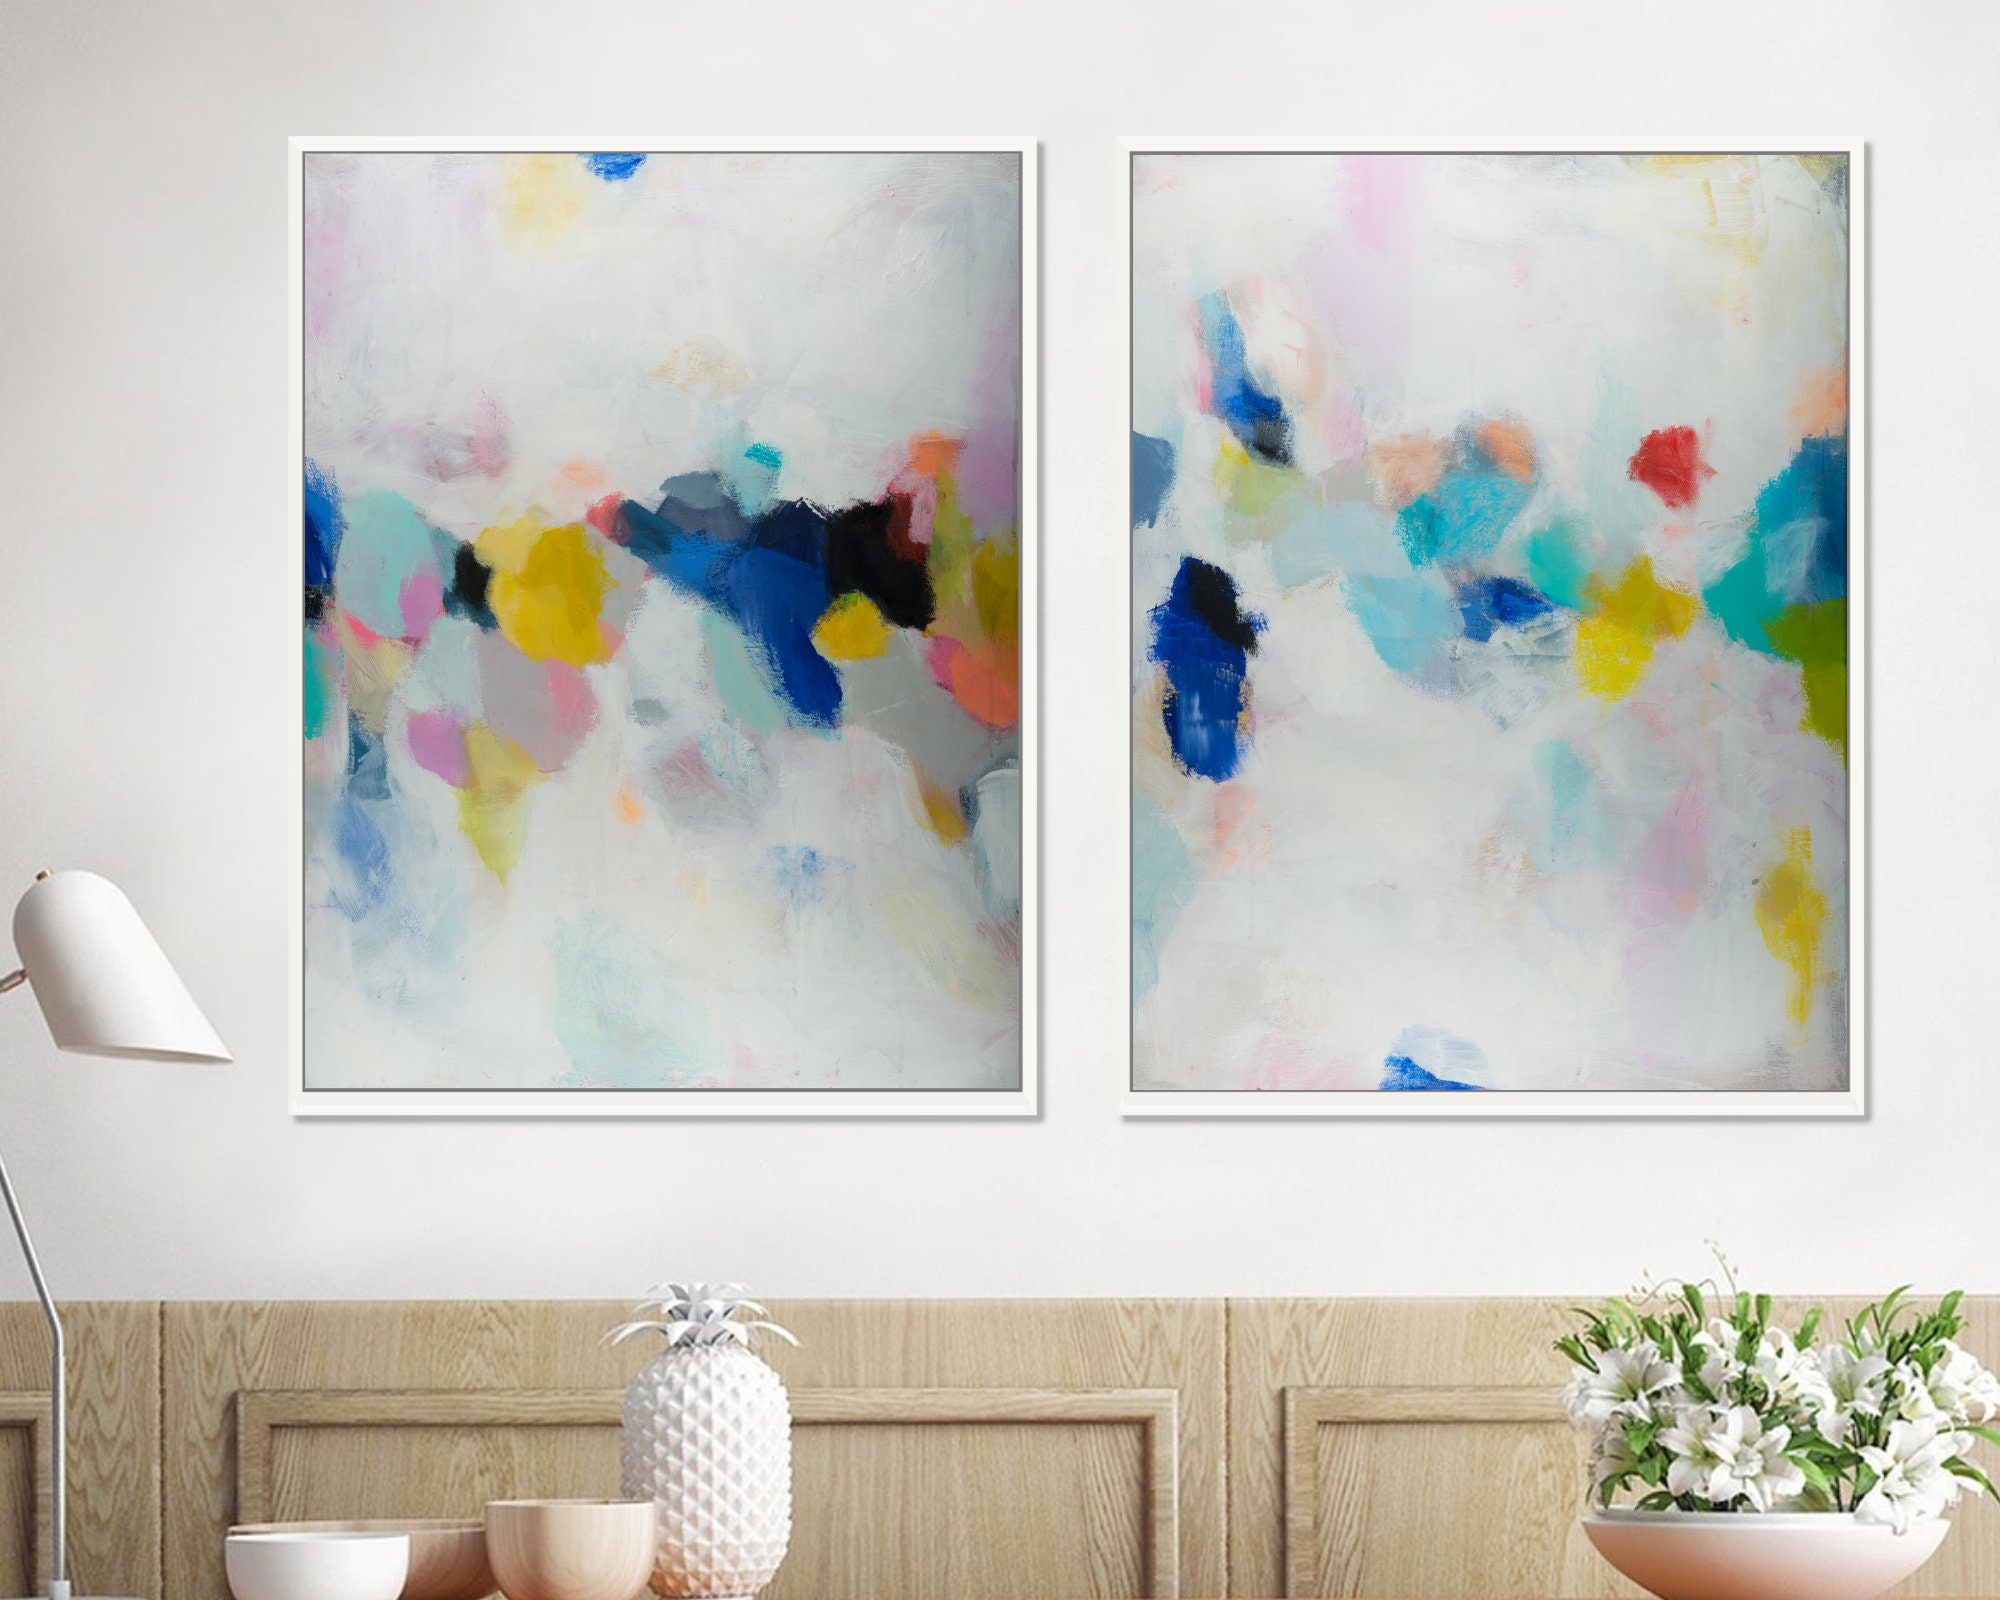 Set of 2 extra large colorful prints Acrylic Abstract | Etsy